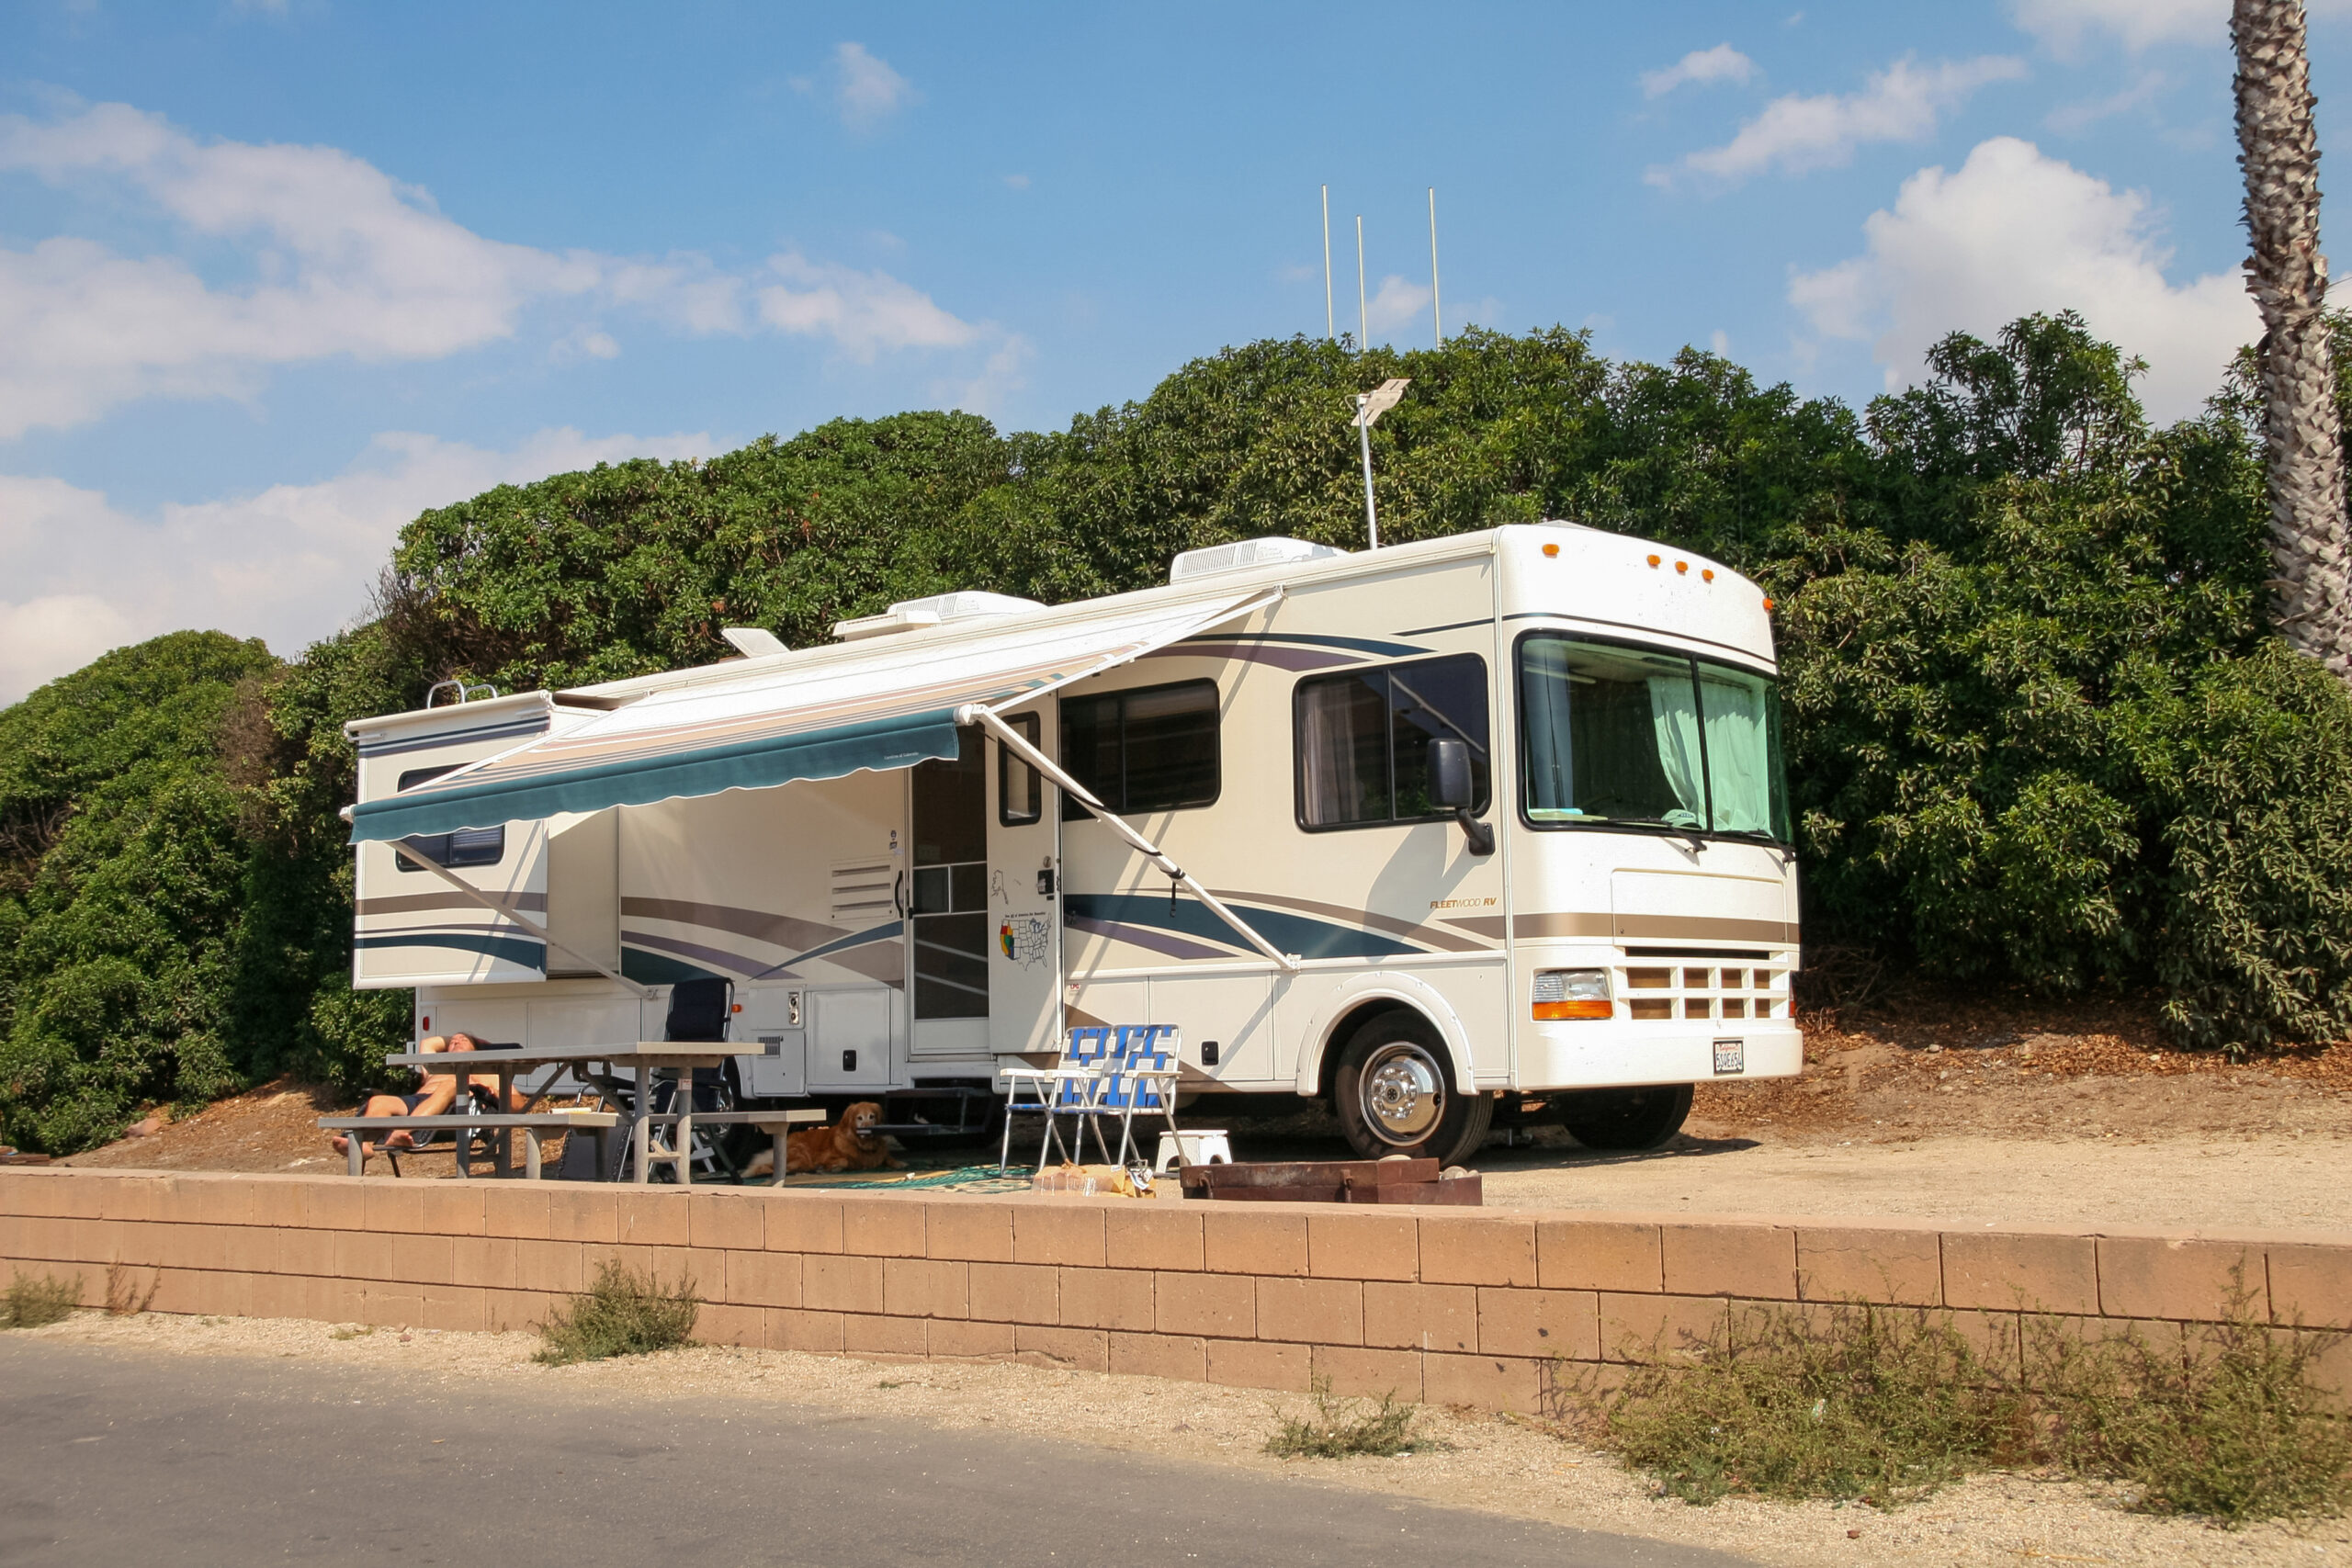 RV camping in hot weather